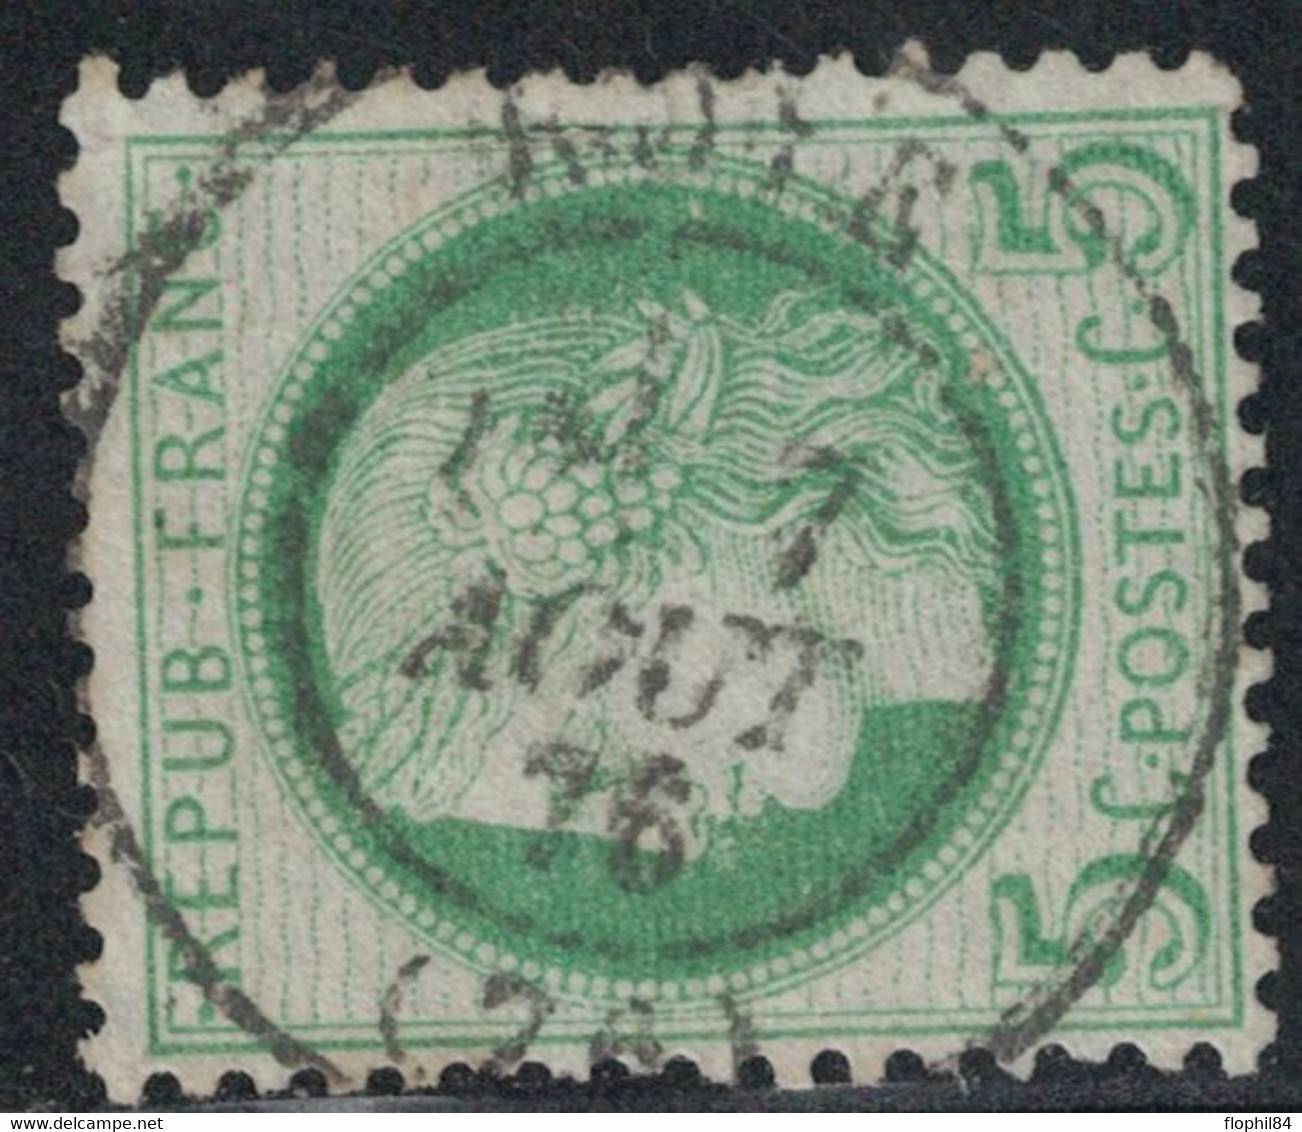 CERES - N°53 - OBLITERATION CACHET A DATE - ROYE - SOMME - COTE TIMBRE 10€. - 1871-1875 Ceres